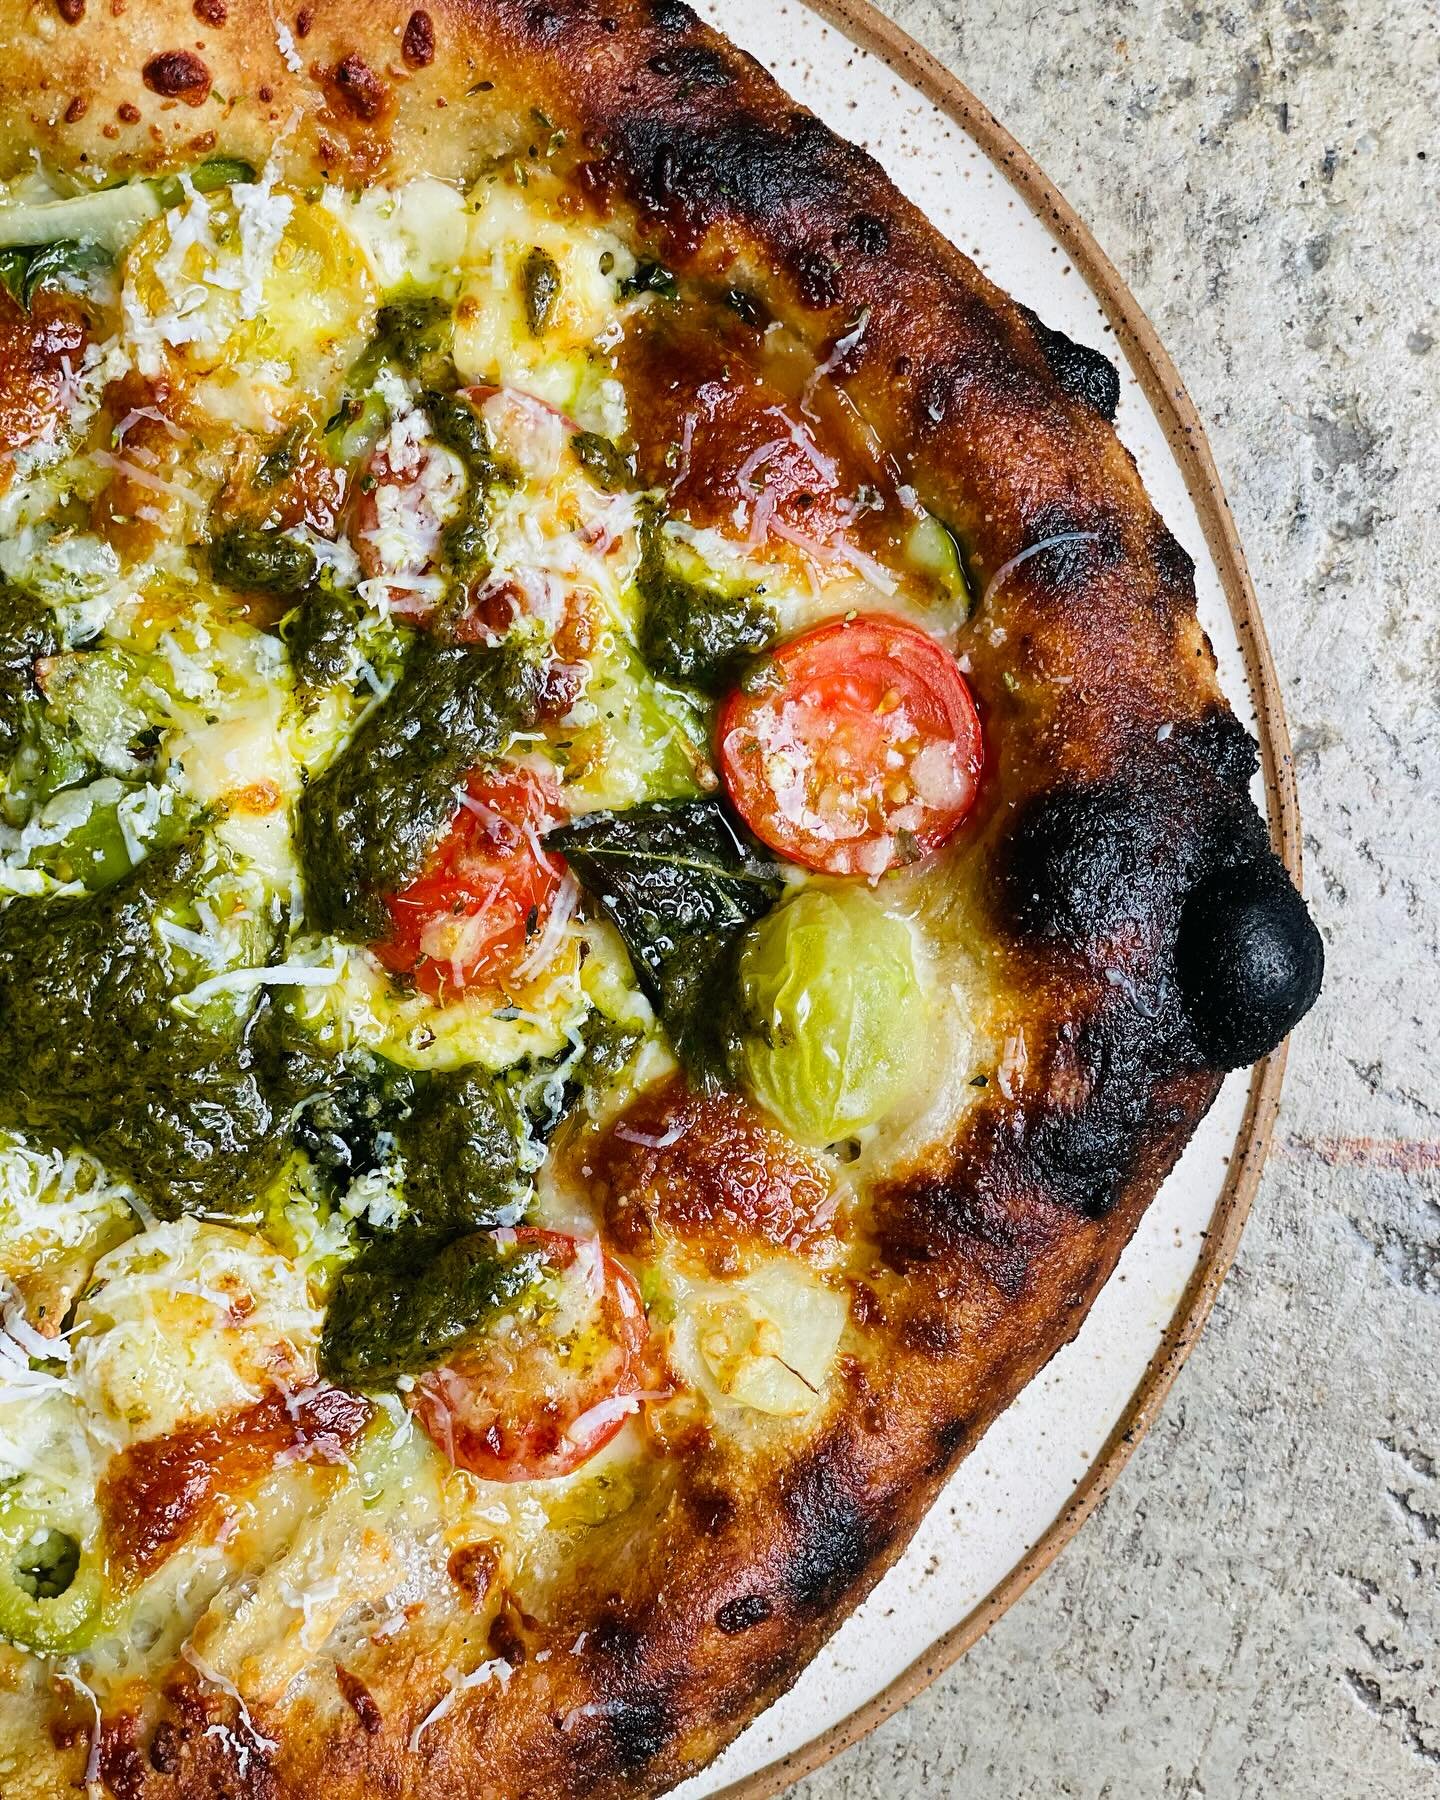 Another new one for your Friday enjoyment.  @farmage showed up yesterday with some surprise cherry tomatoes, so we had to showcase them on a pizza.  This one&rsquo;s features produce from 3 of our favorite farmers.  Get it while you can.  @sarahbeaa 